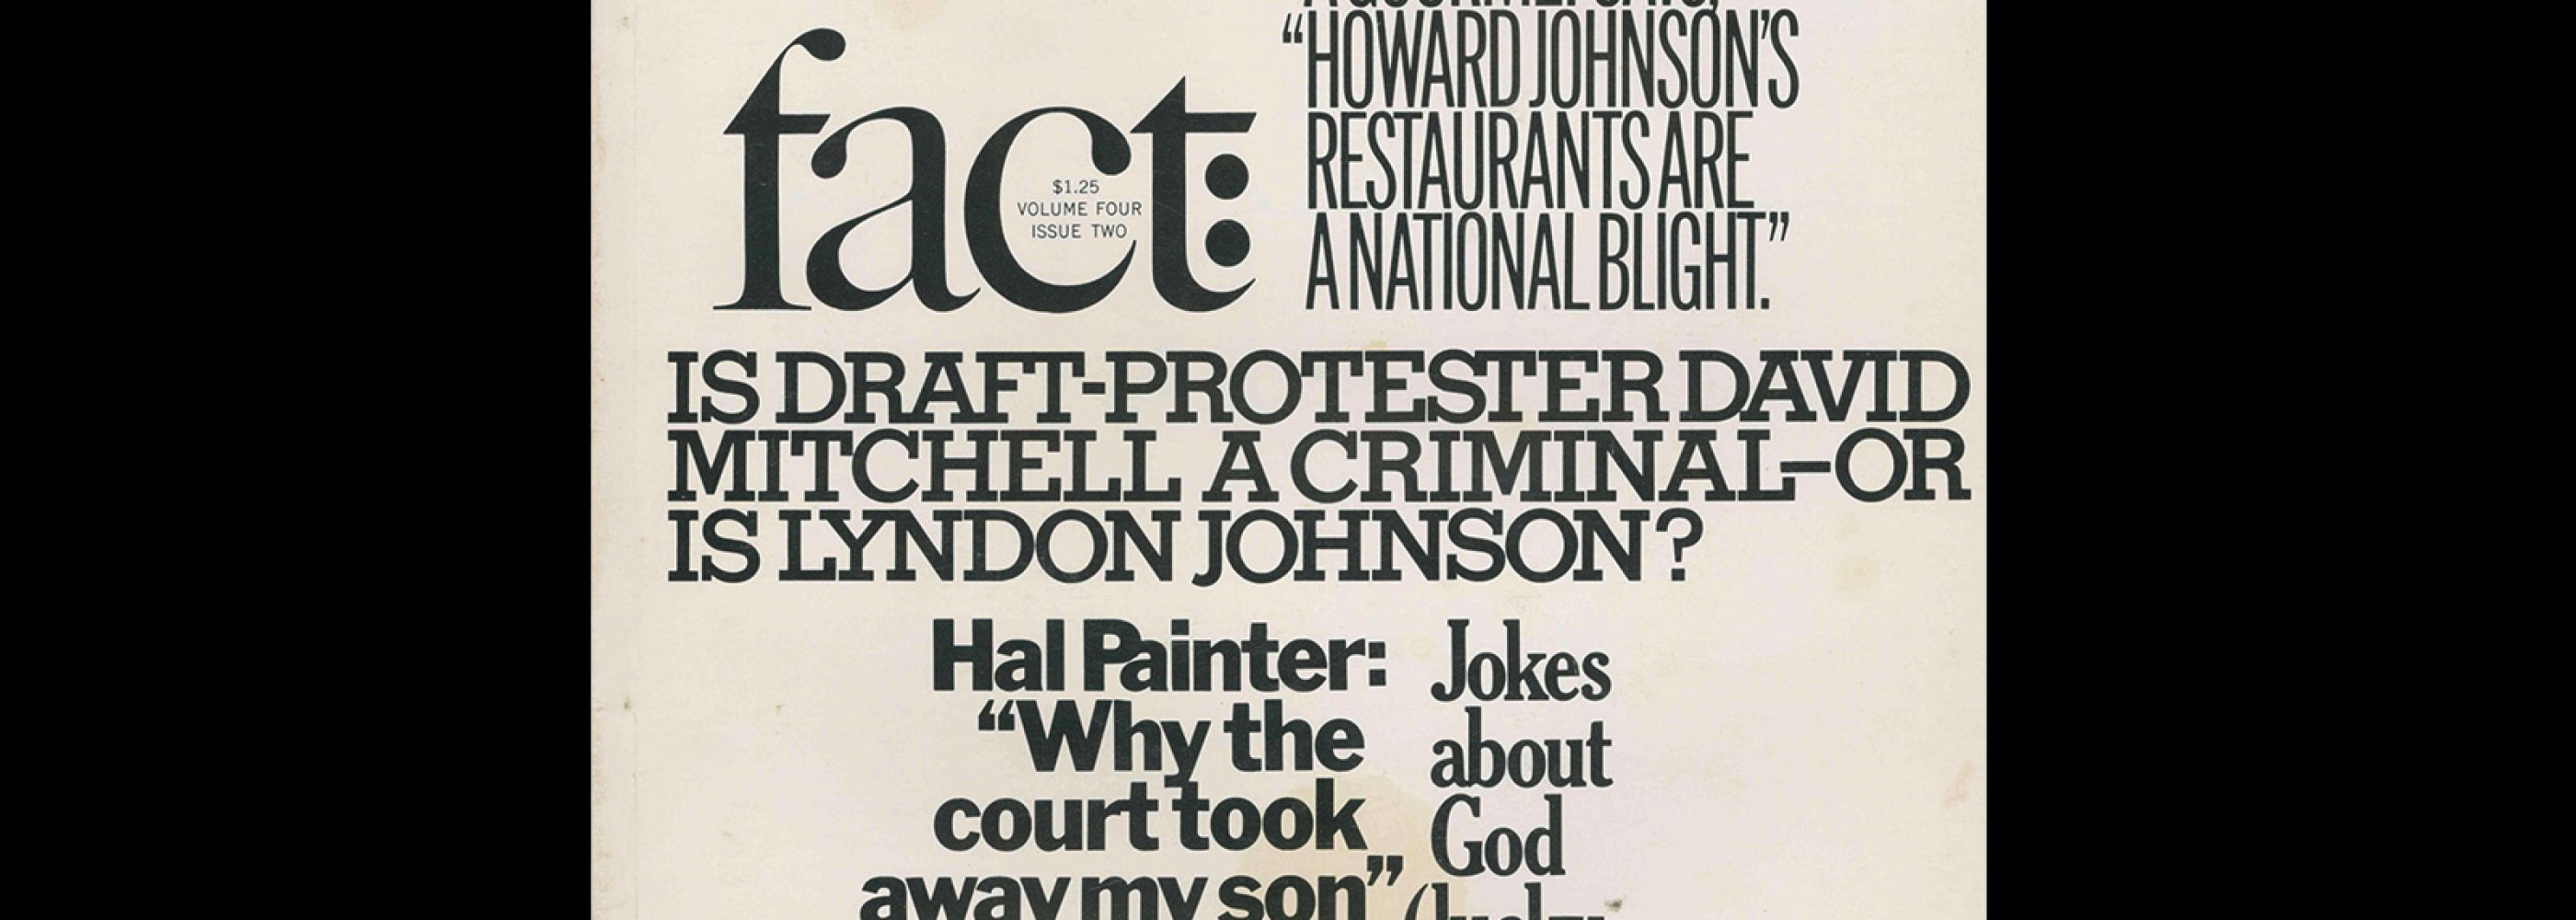 Fact, Volume Four, Issue Two, 1967. Designed by Herb Lubalin